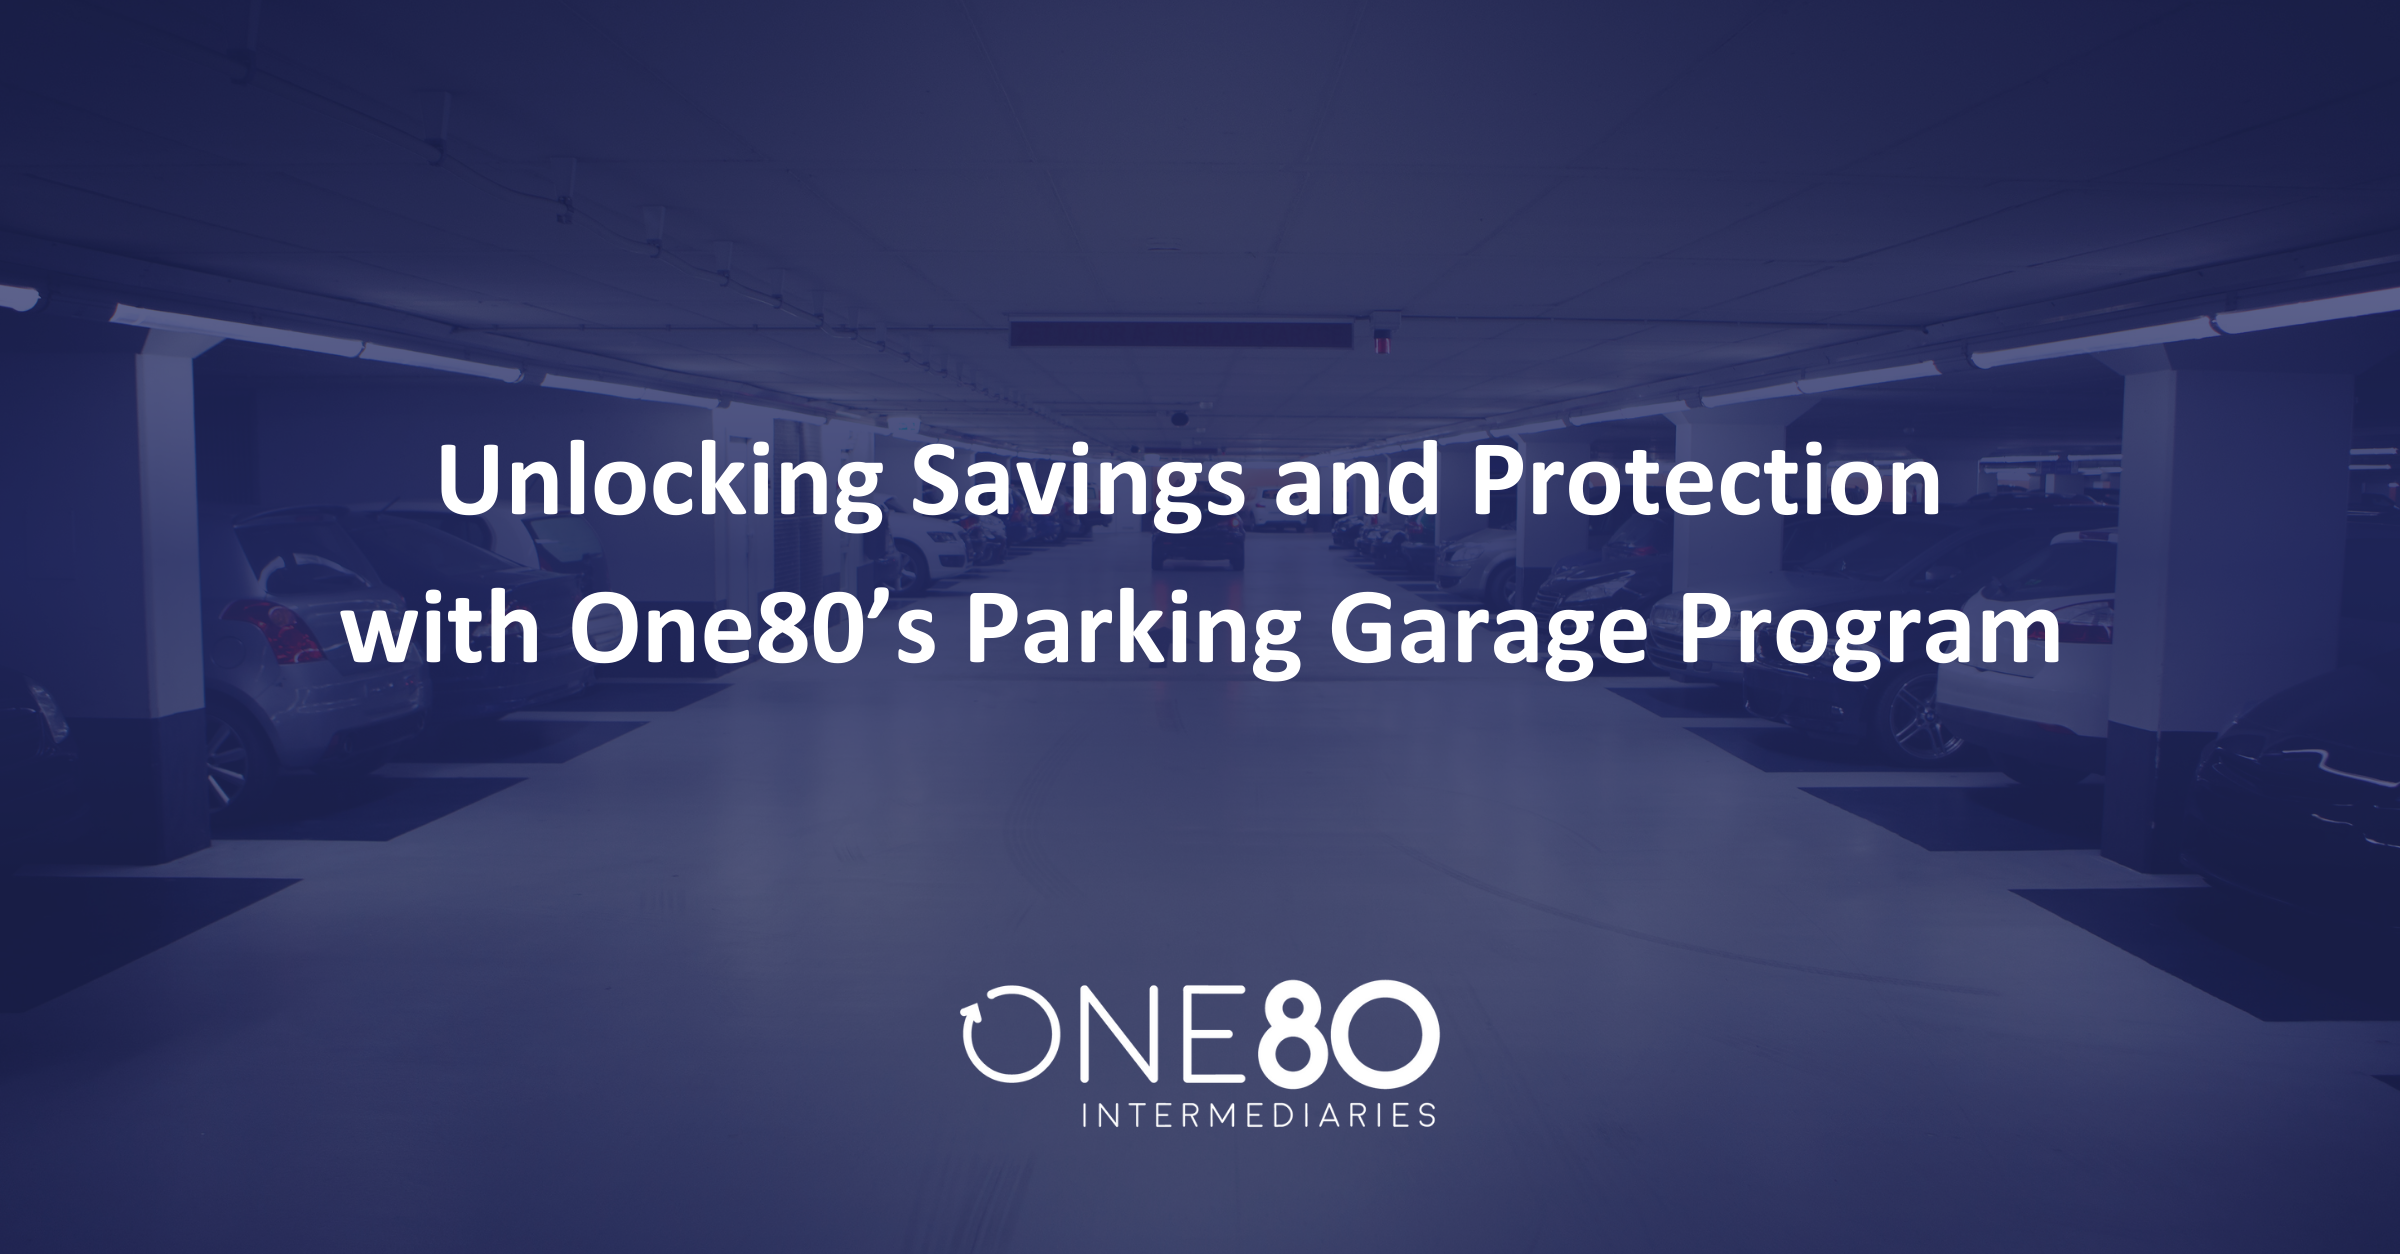 Unlocking Savings and Protection with One80's Parking Garage Program